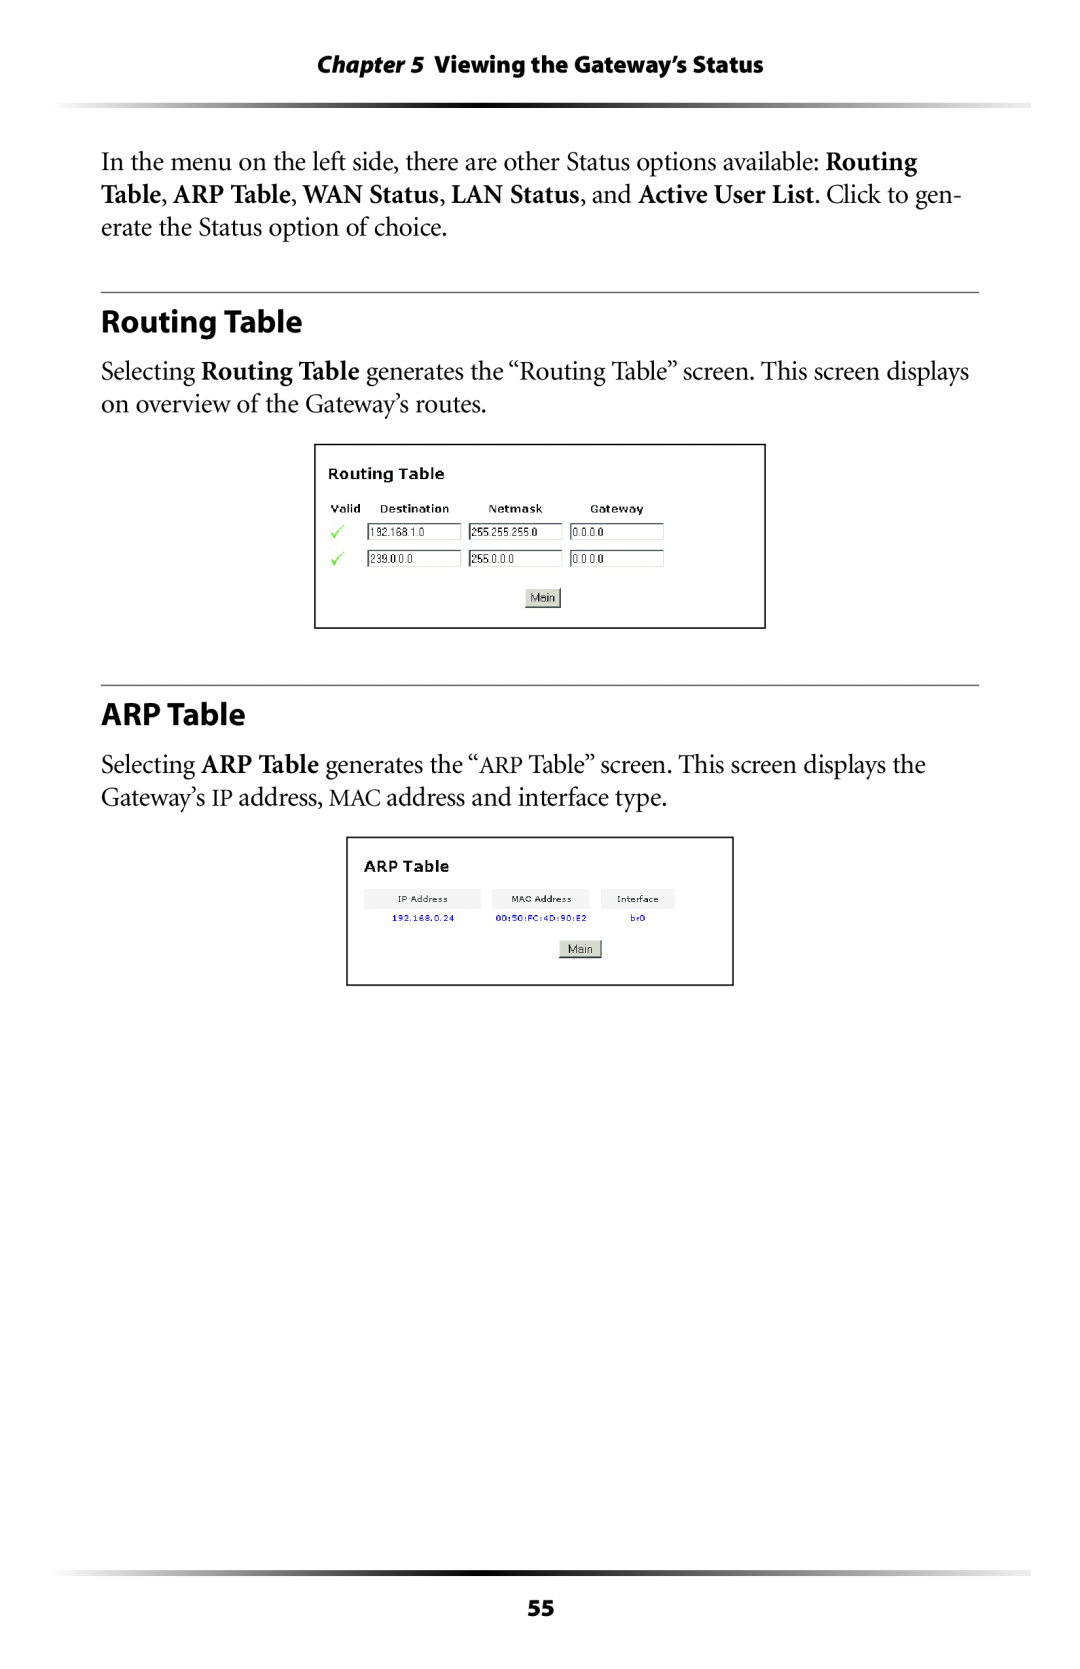 Gateway GT704 user manual Routing Table, ARP Table, Viewing the Gateway’s Status 